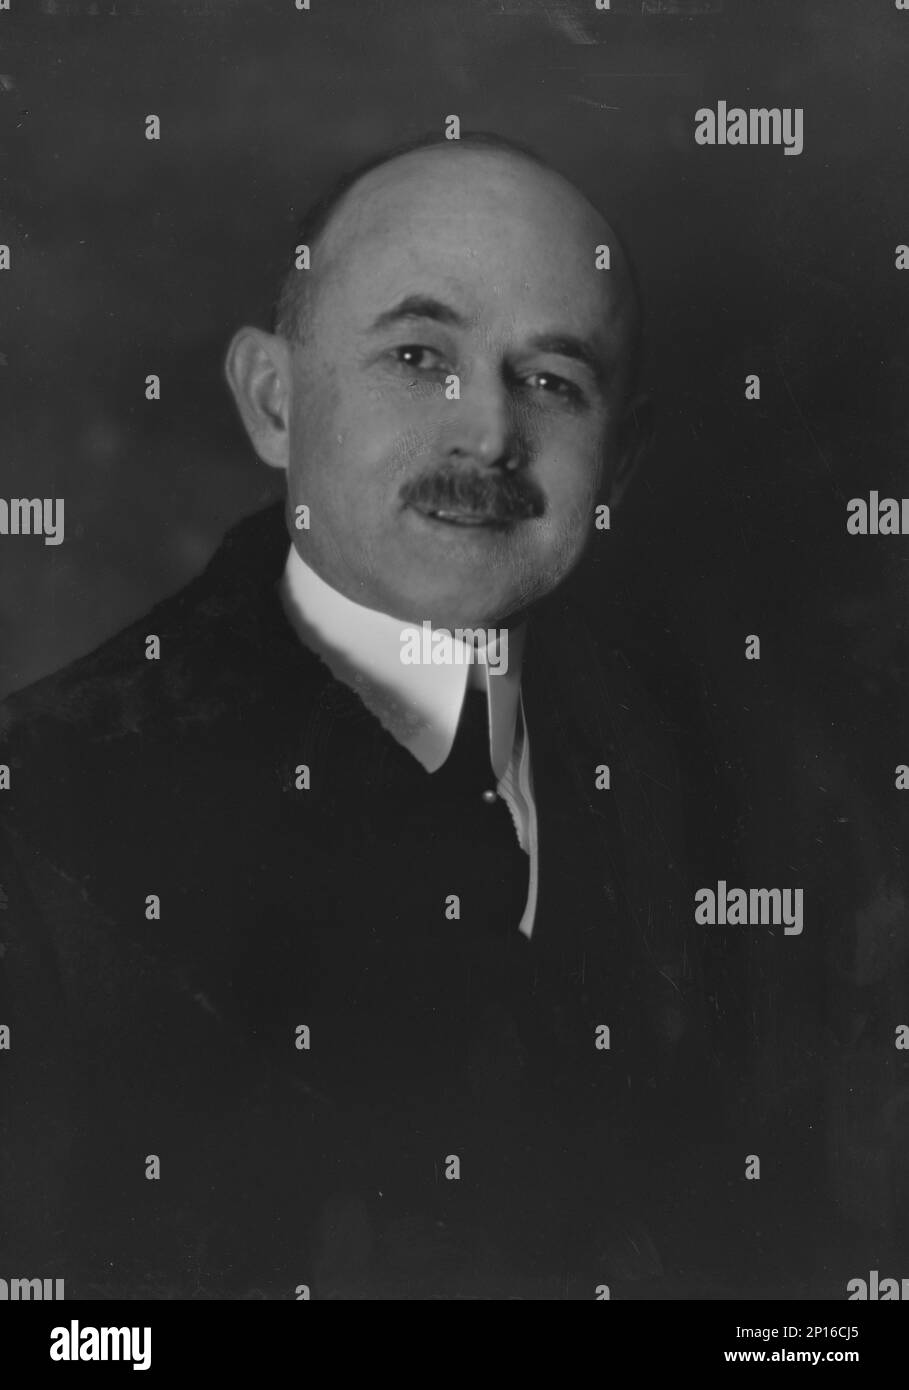 Judge Benjamin Lindsey, portrait photograph, 1917 Dec. 27. American judge and social reformer Benjamin Barr Lindsey co-wrote a controversial book about 'companionate marriage', the concept that young men and women should be able to live together in a trial marriage. Stock Photo